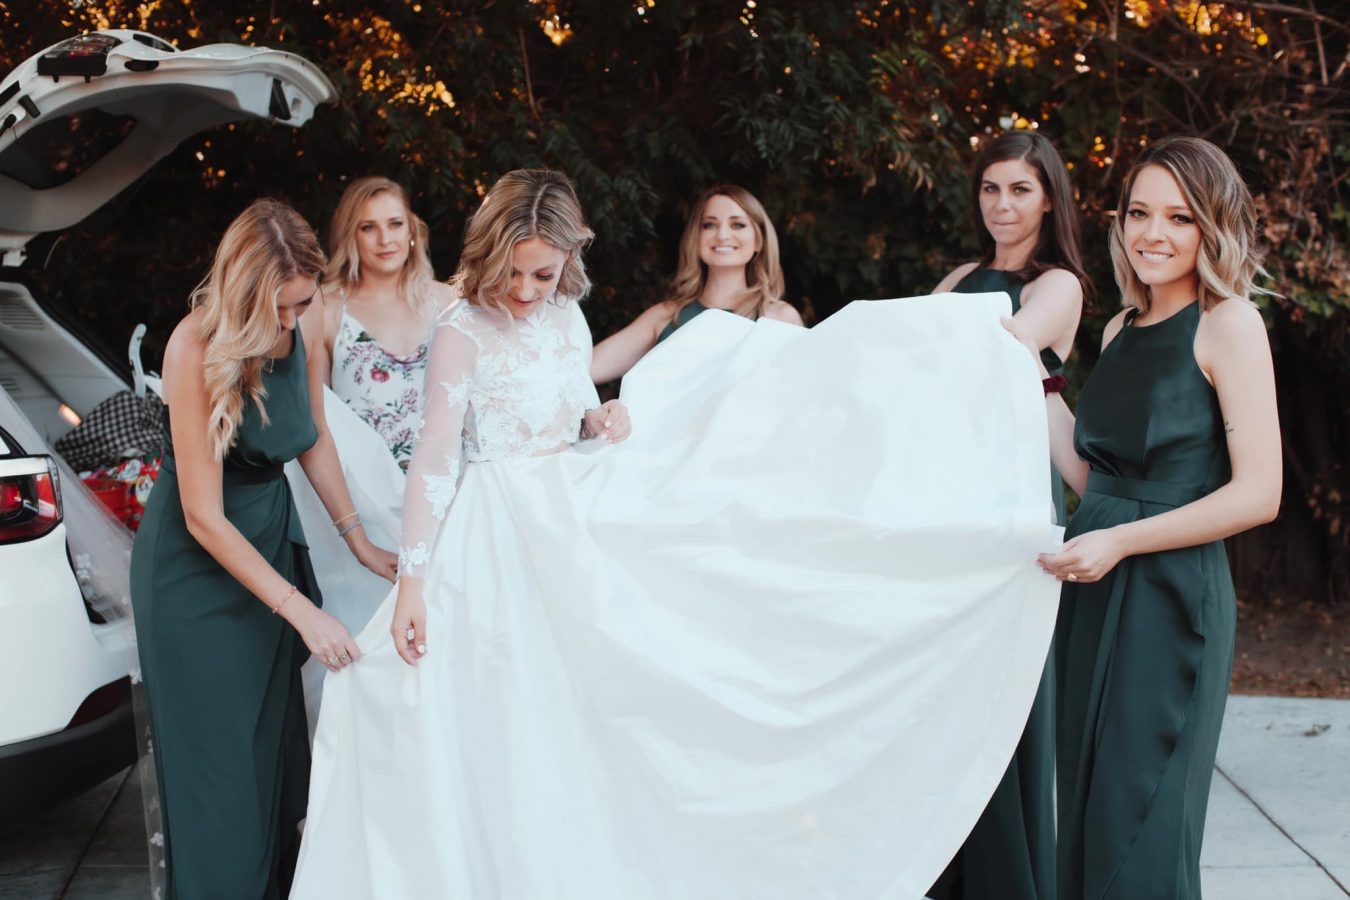 Bridesmaids helping Bride with dress 